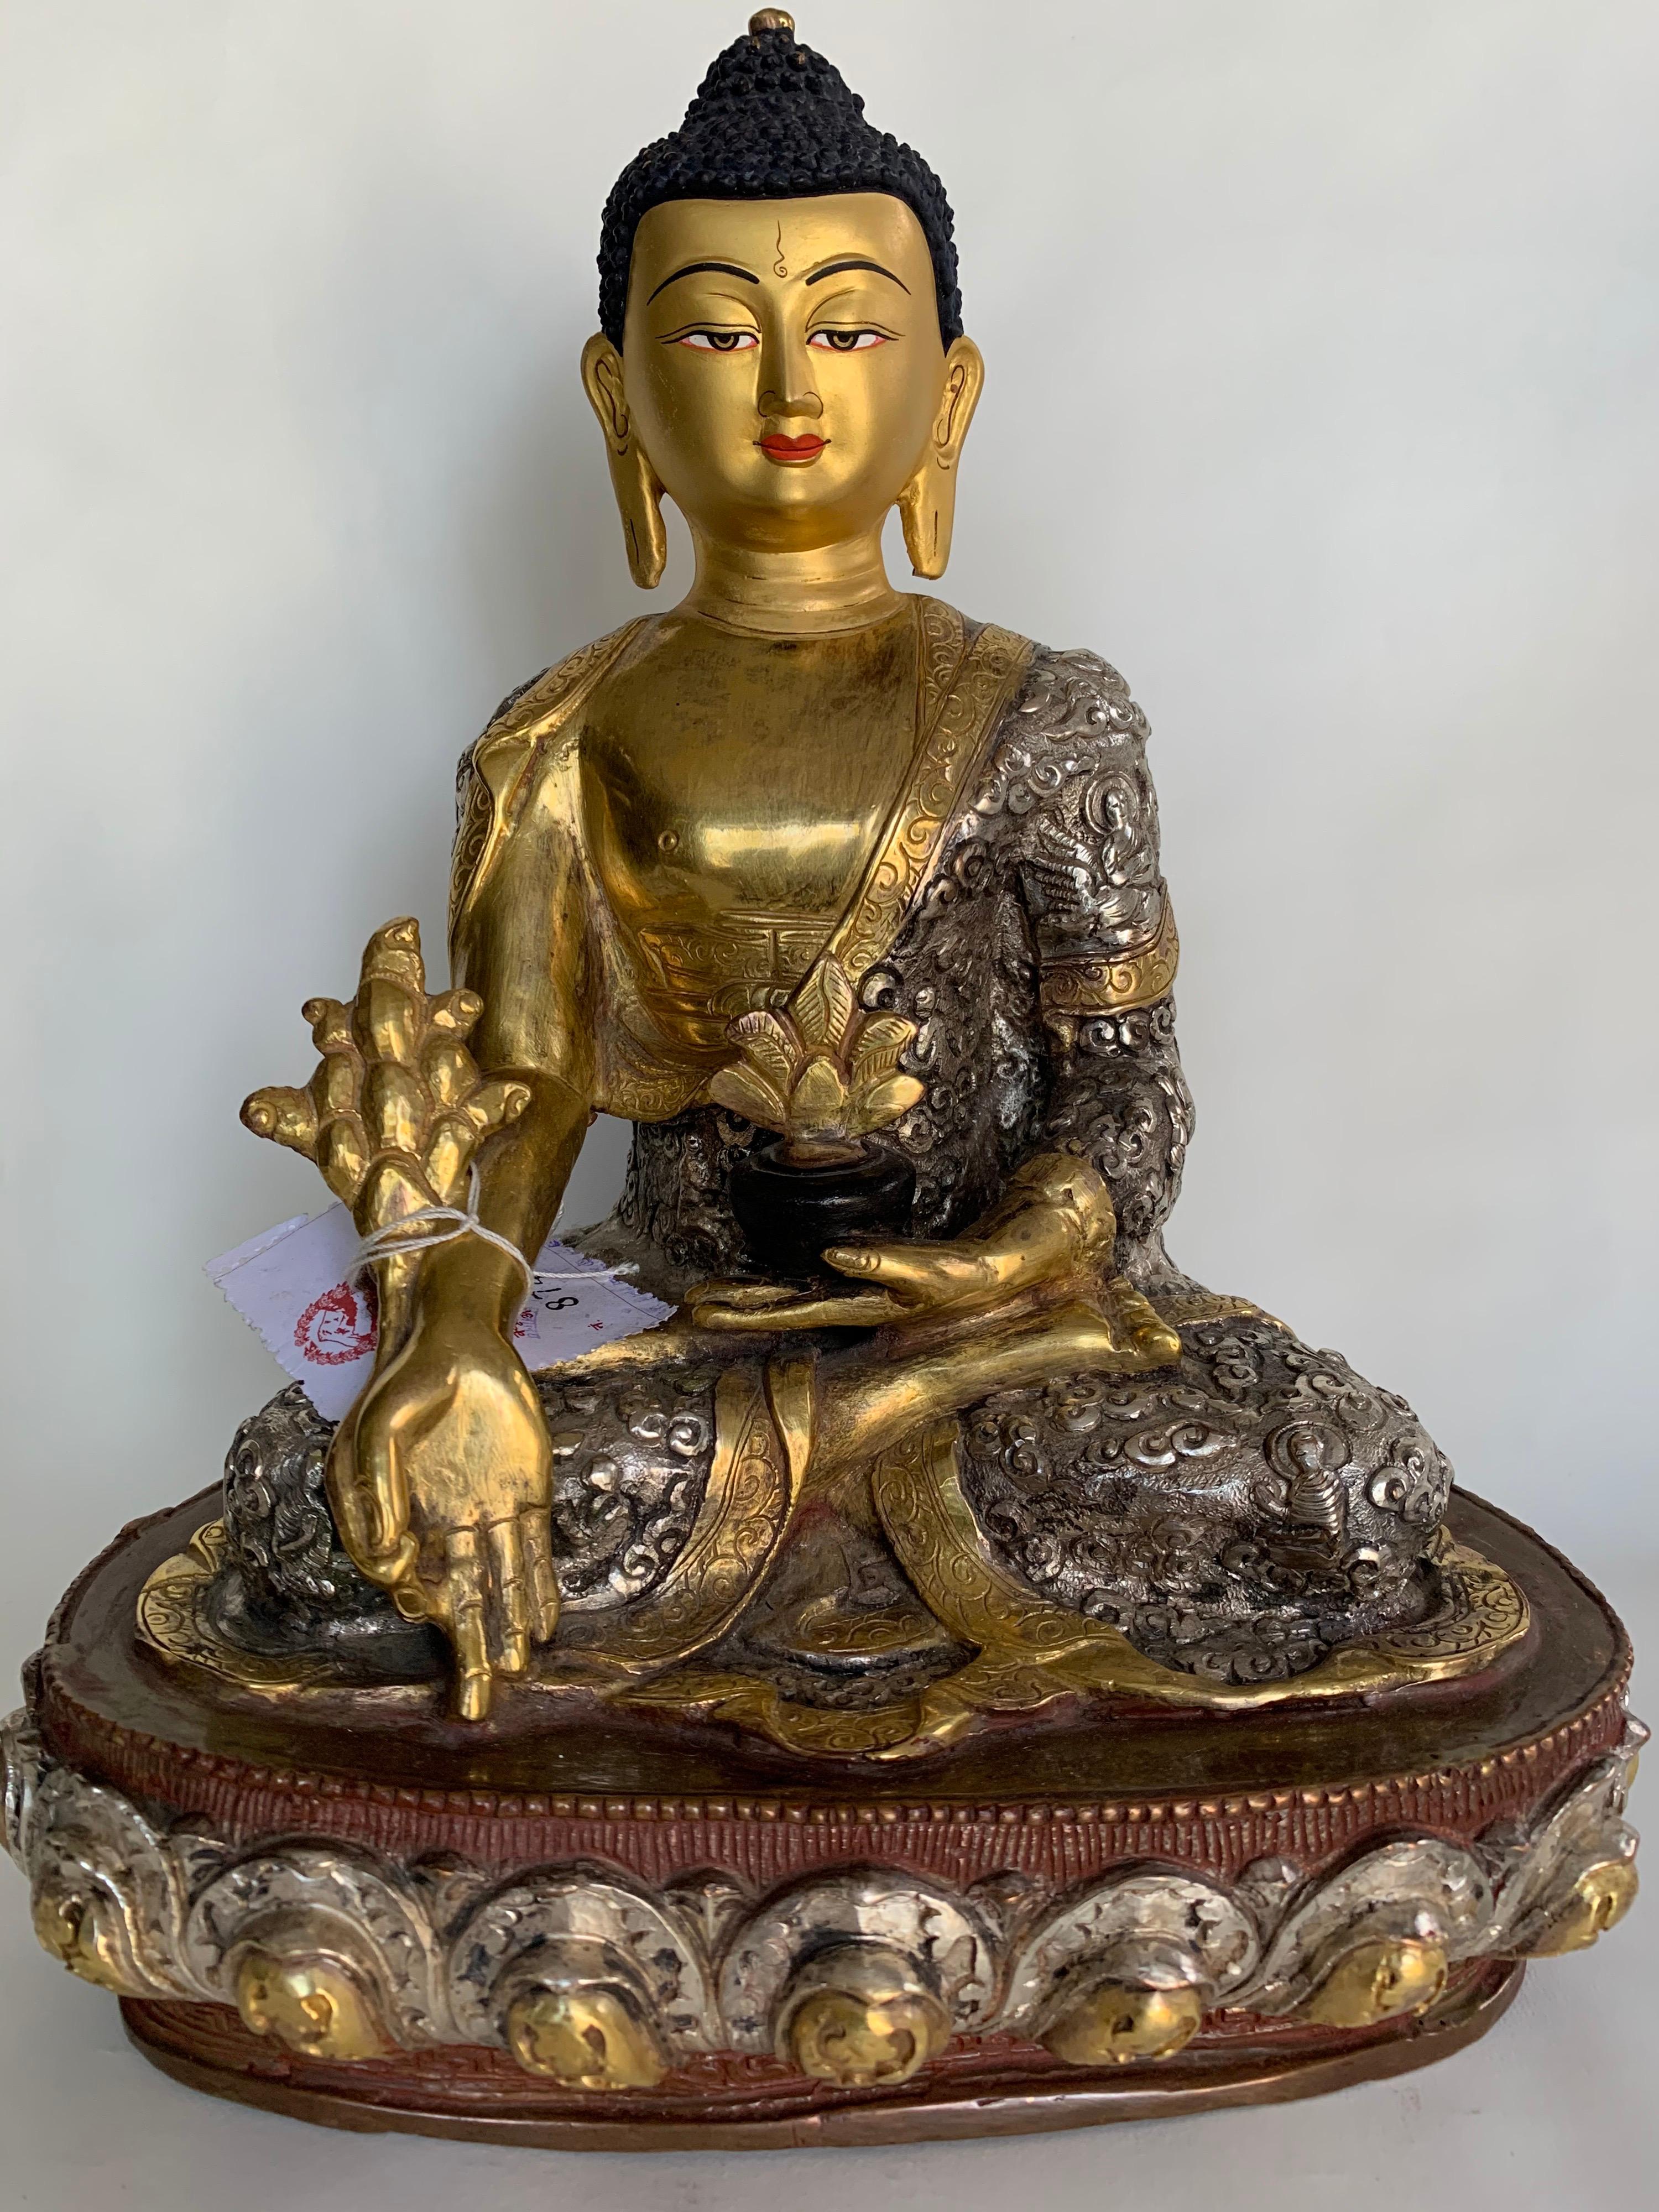 Unknown Figurative Sculpture - Medicine Buddha Statue 9.5 Inch with 24 Gold Handcrafted by Lost Wax Process